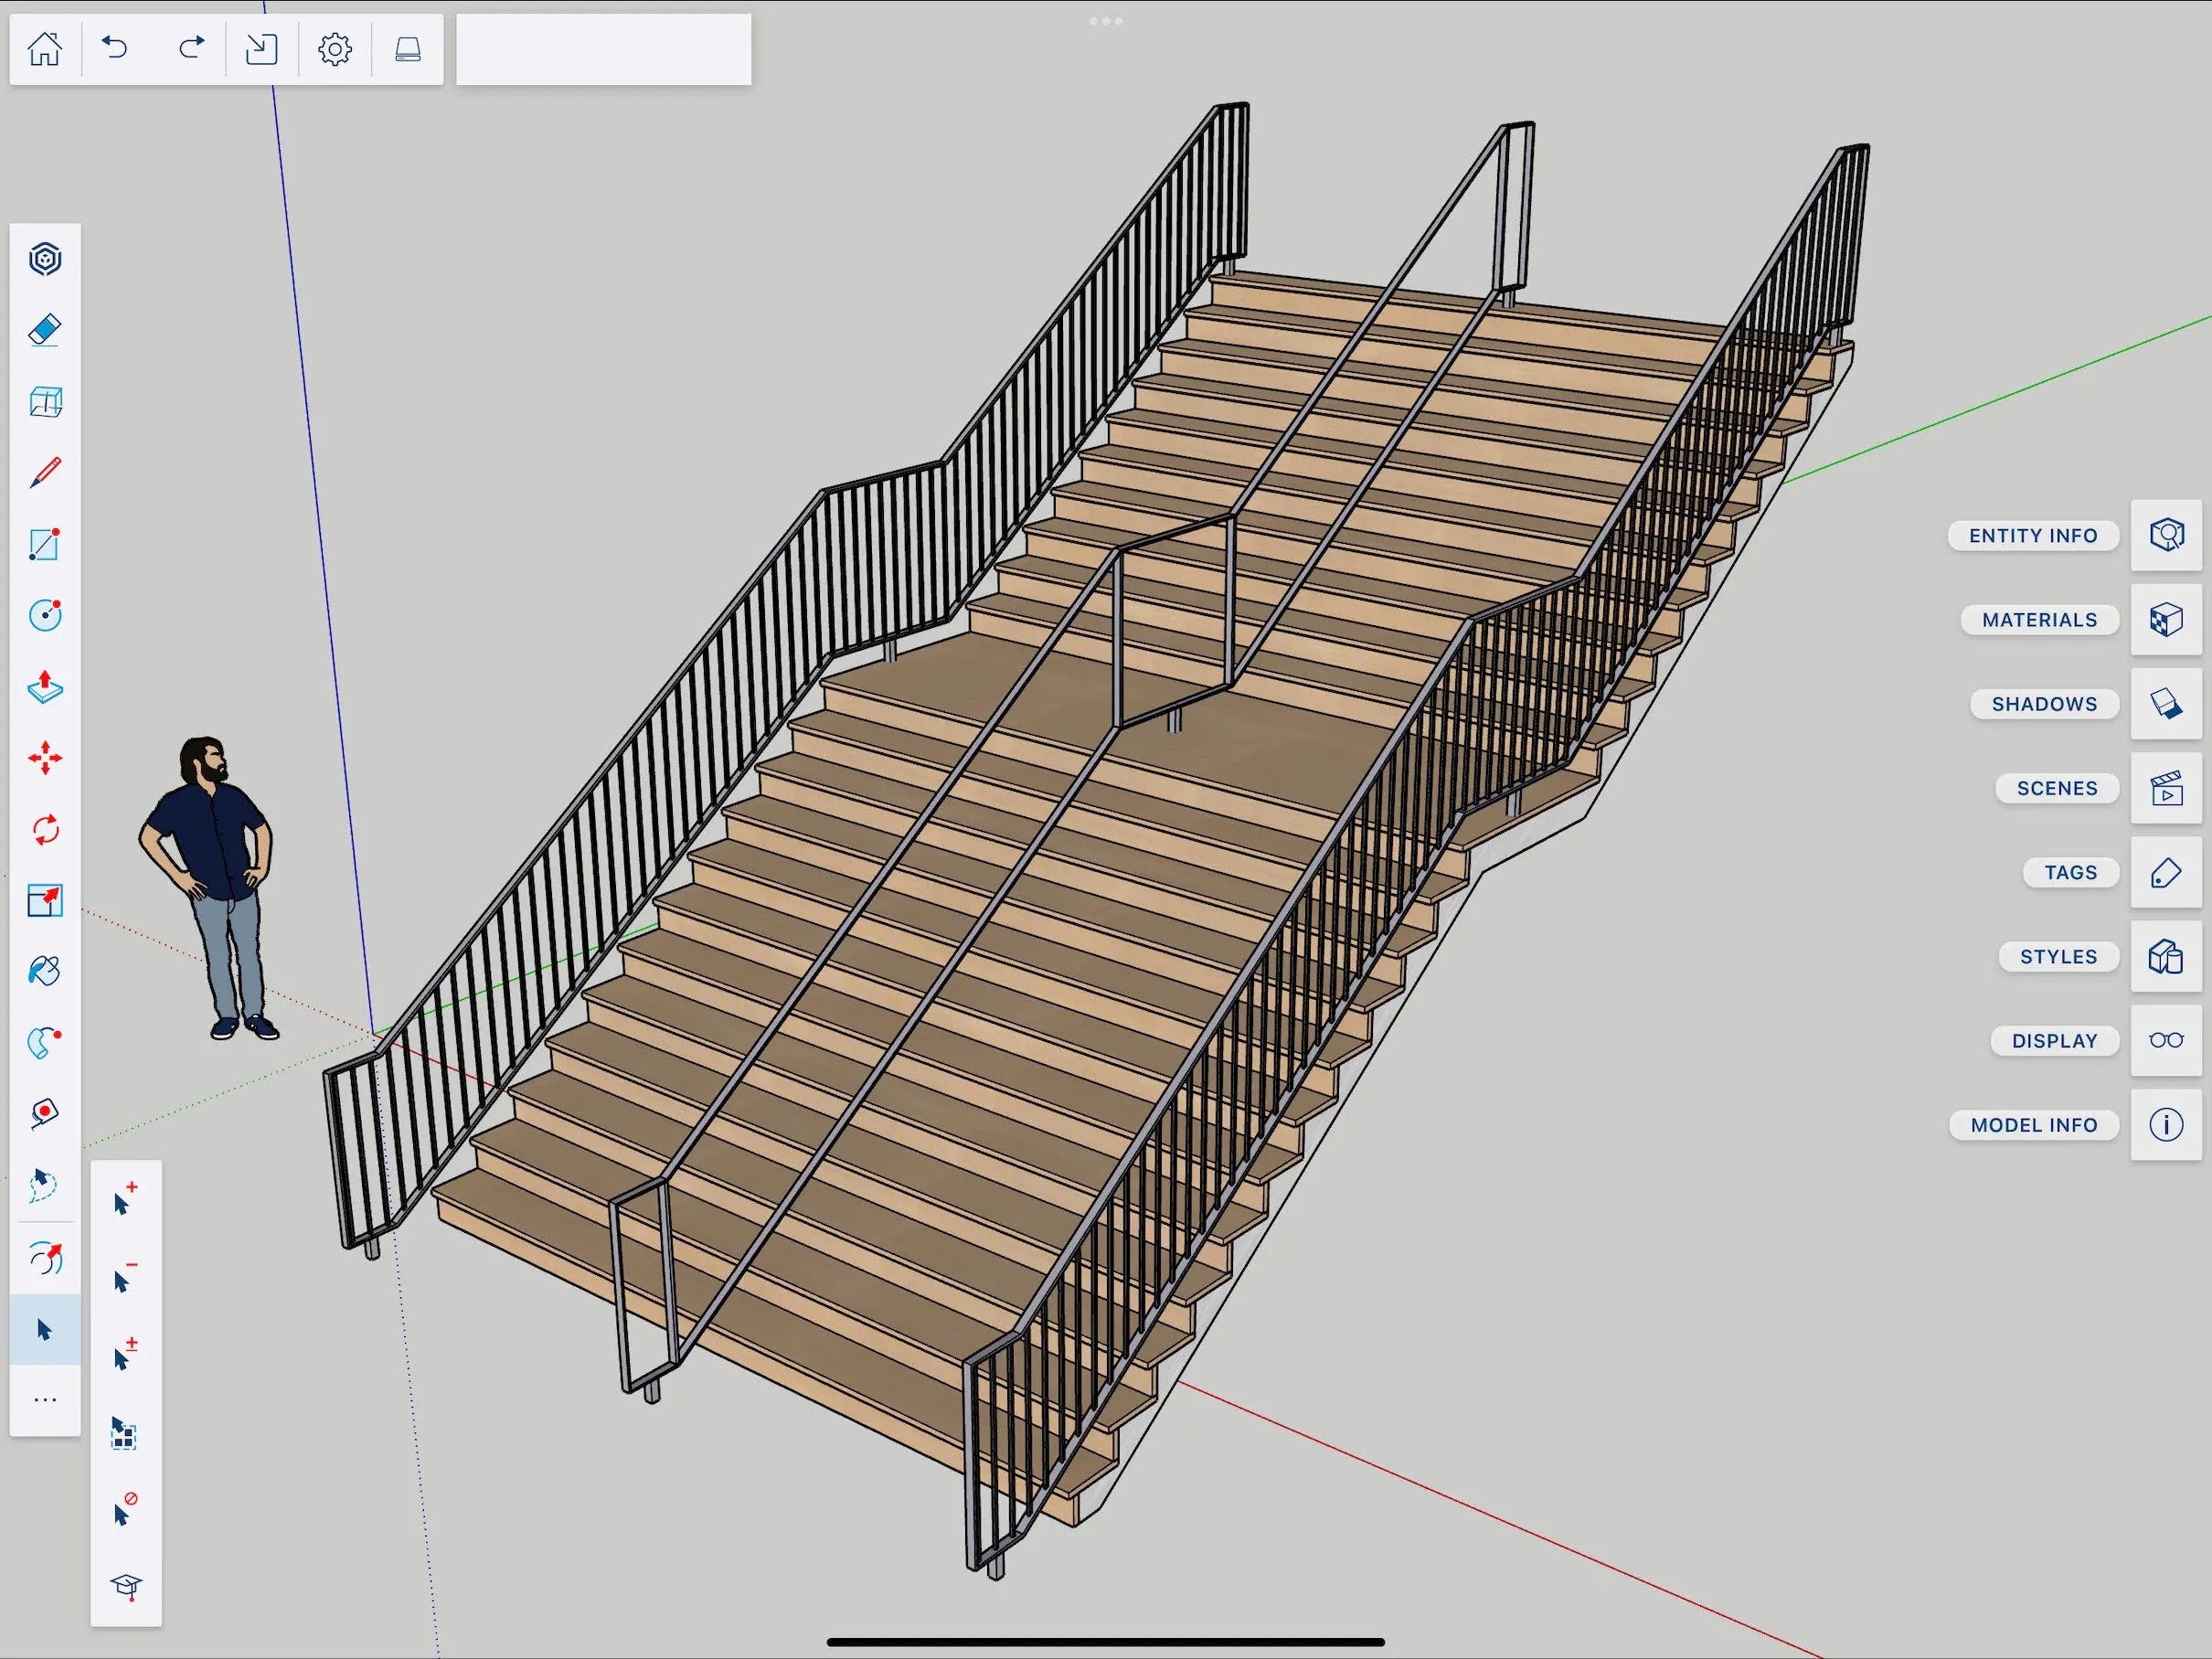 Live Component stairs. Image courtesy of Perkins Eastman.